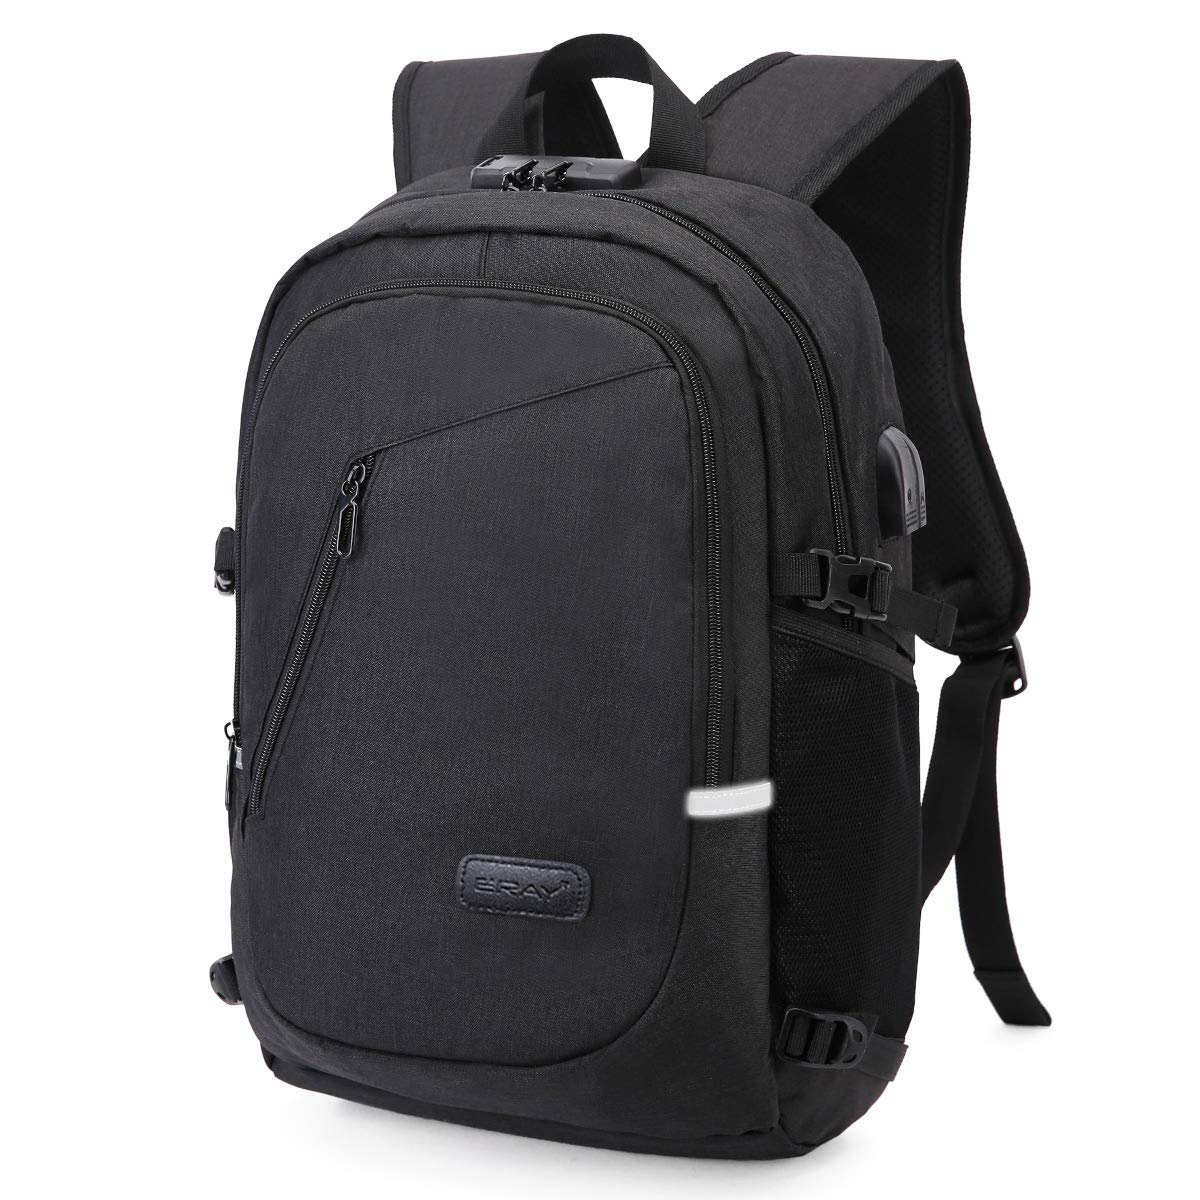 Anti Theft Backpacks For The Frequent Traveller | TouristSecrets